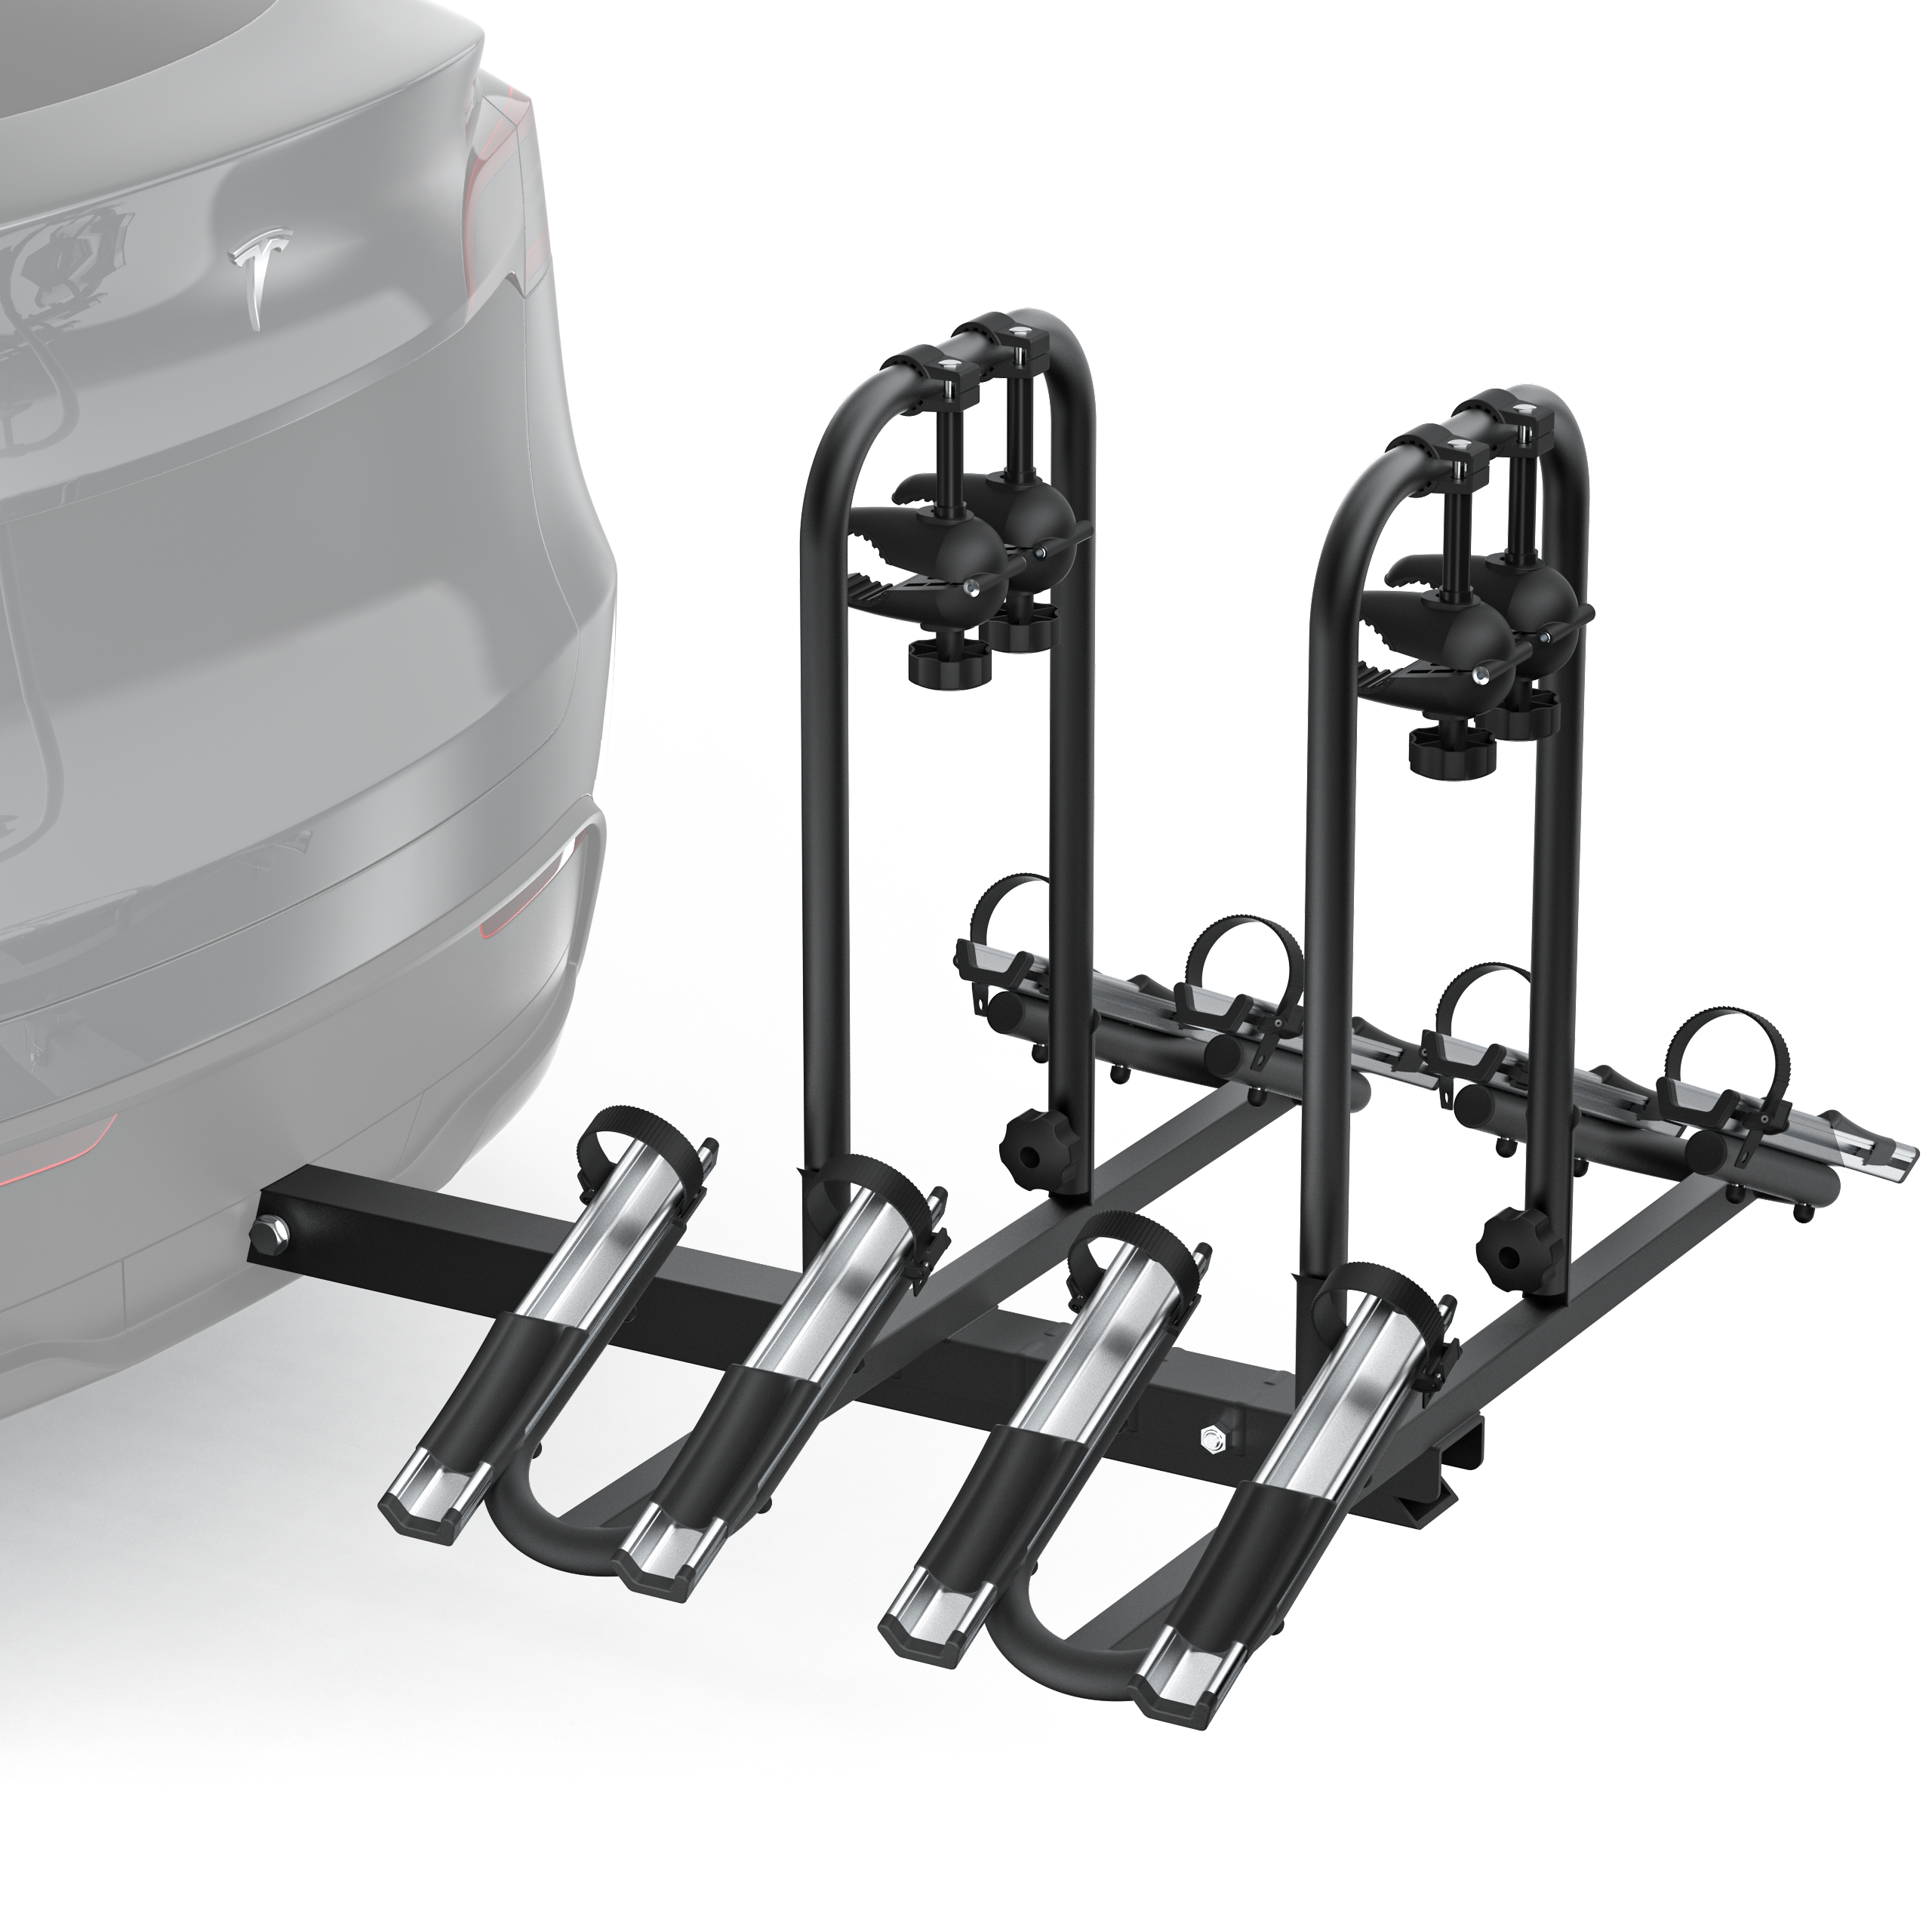 CMC Premium Hitch Rack Carrier，Holds 2, 3, or 4 Bikes Safely - Fits All Standard 2